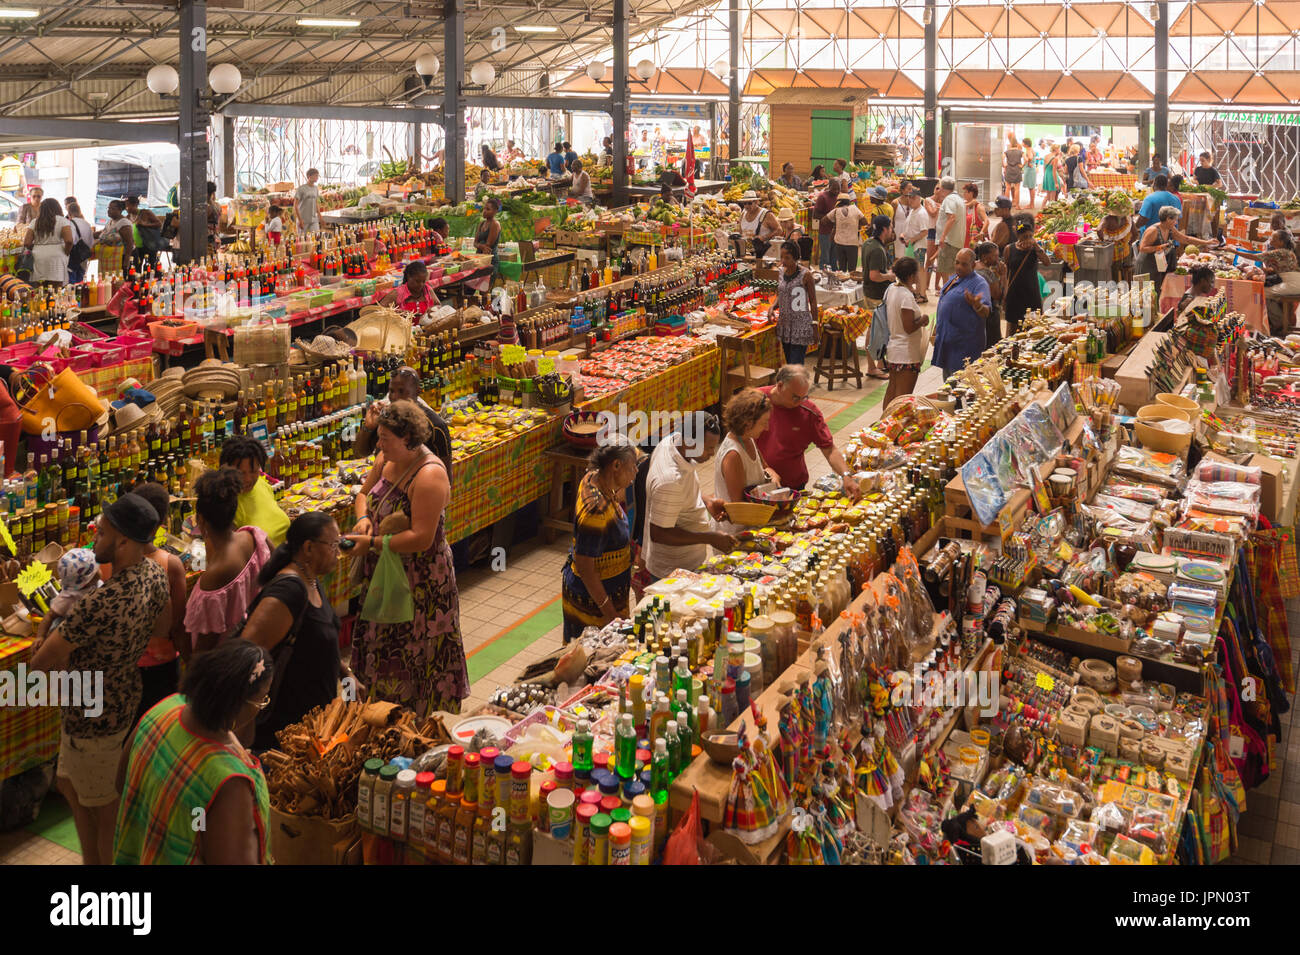 Covered Market in Fort-De-France, Martinique Island, West Indies Stock Photo